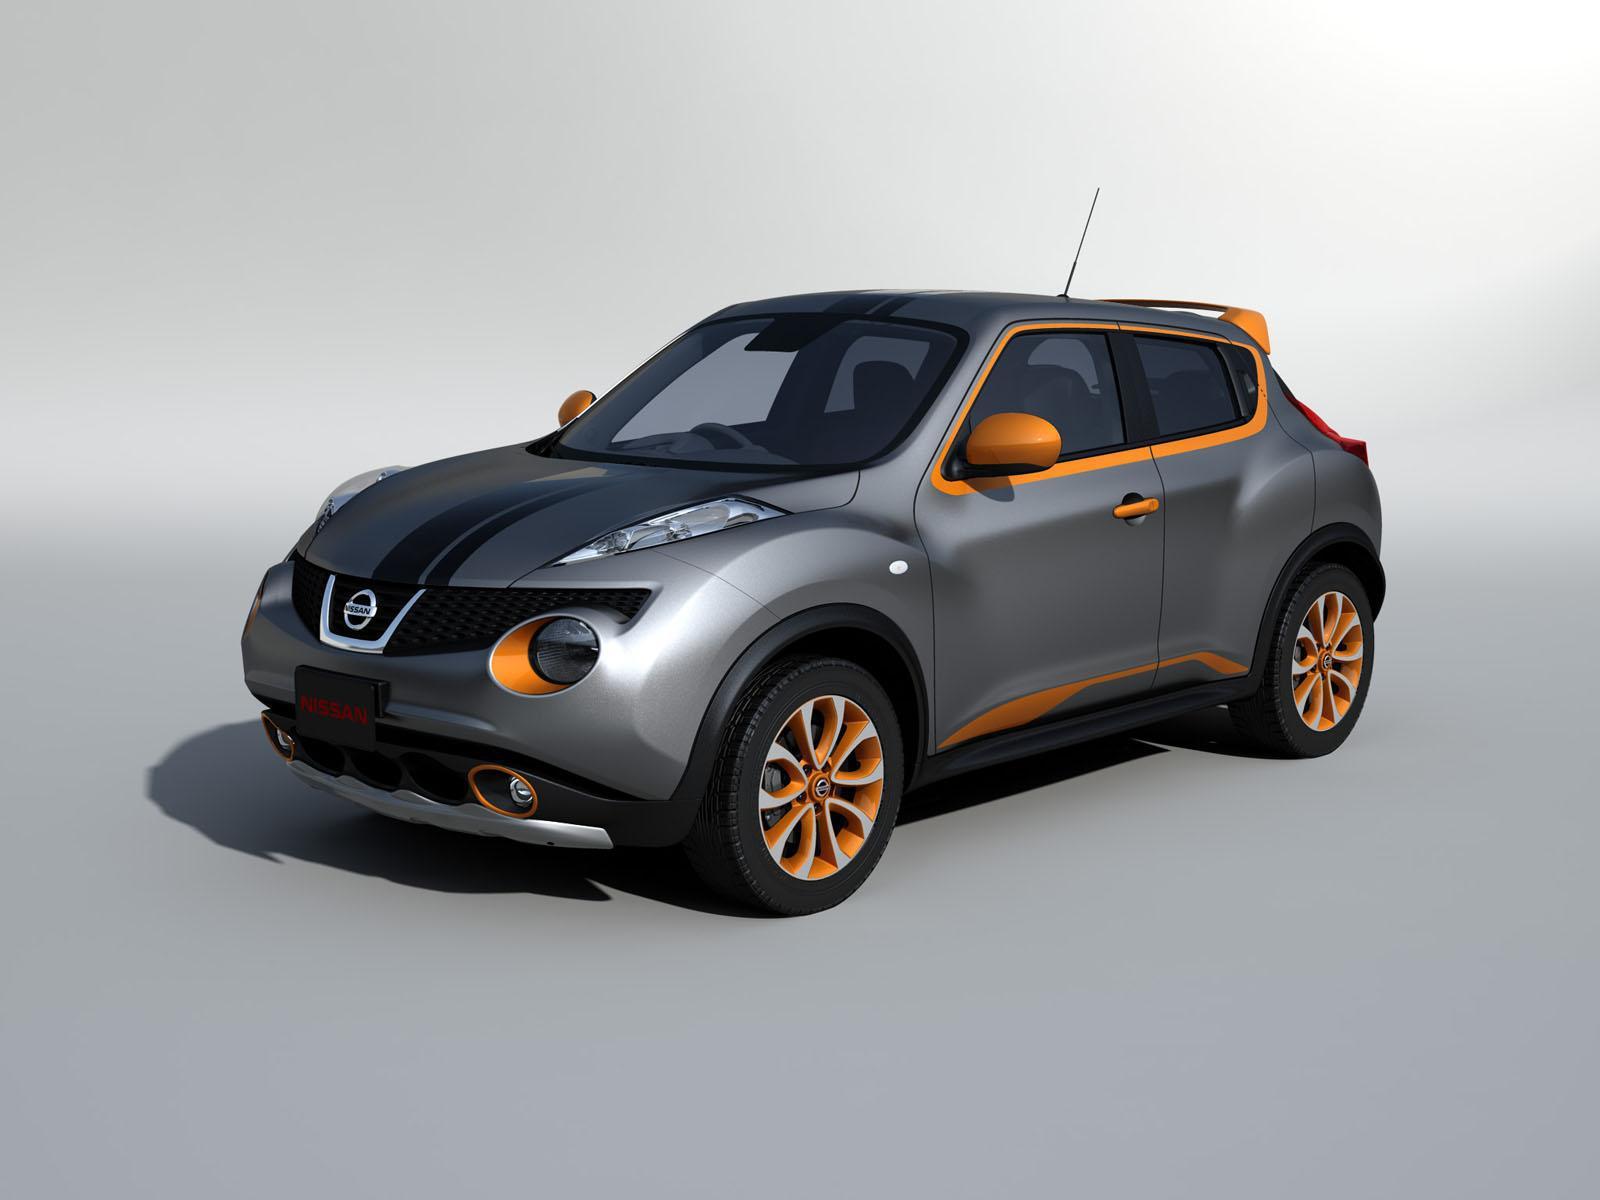 Amazing High Quality Nissan Juke Picture & Background Collection